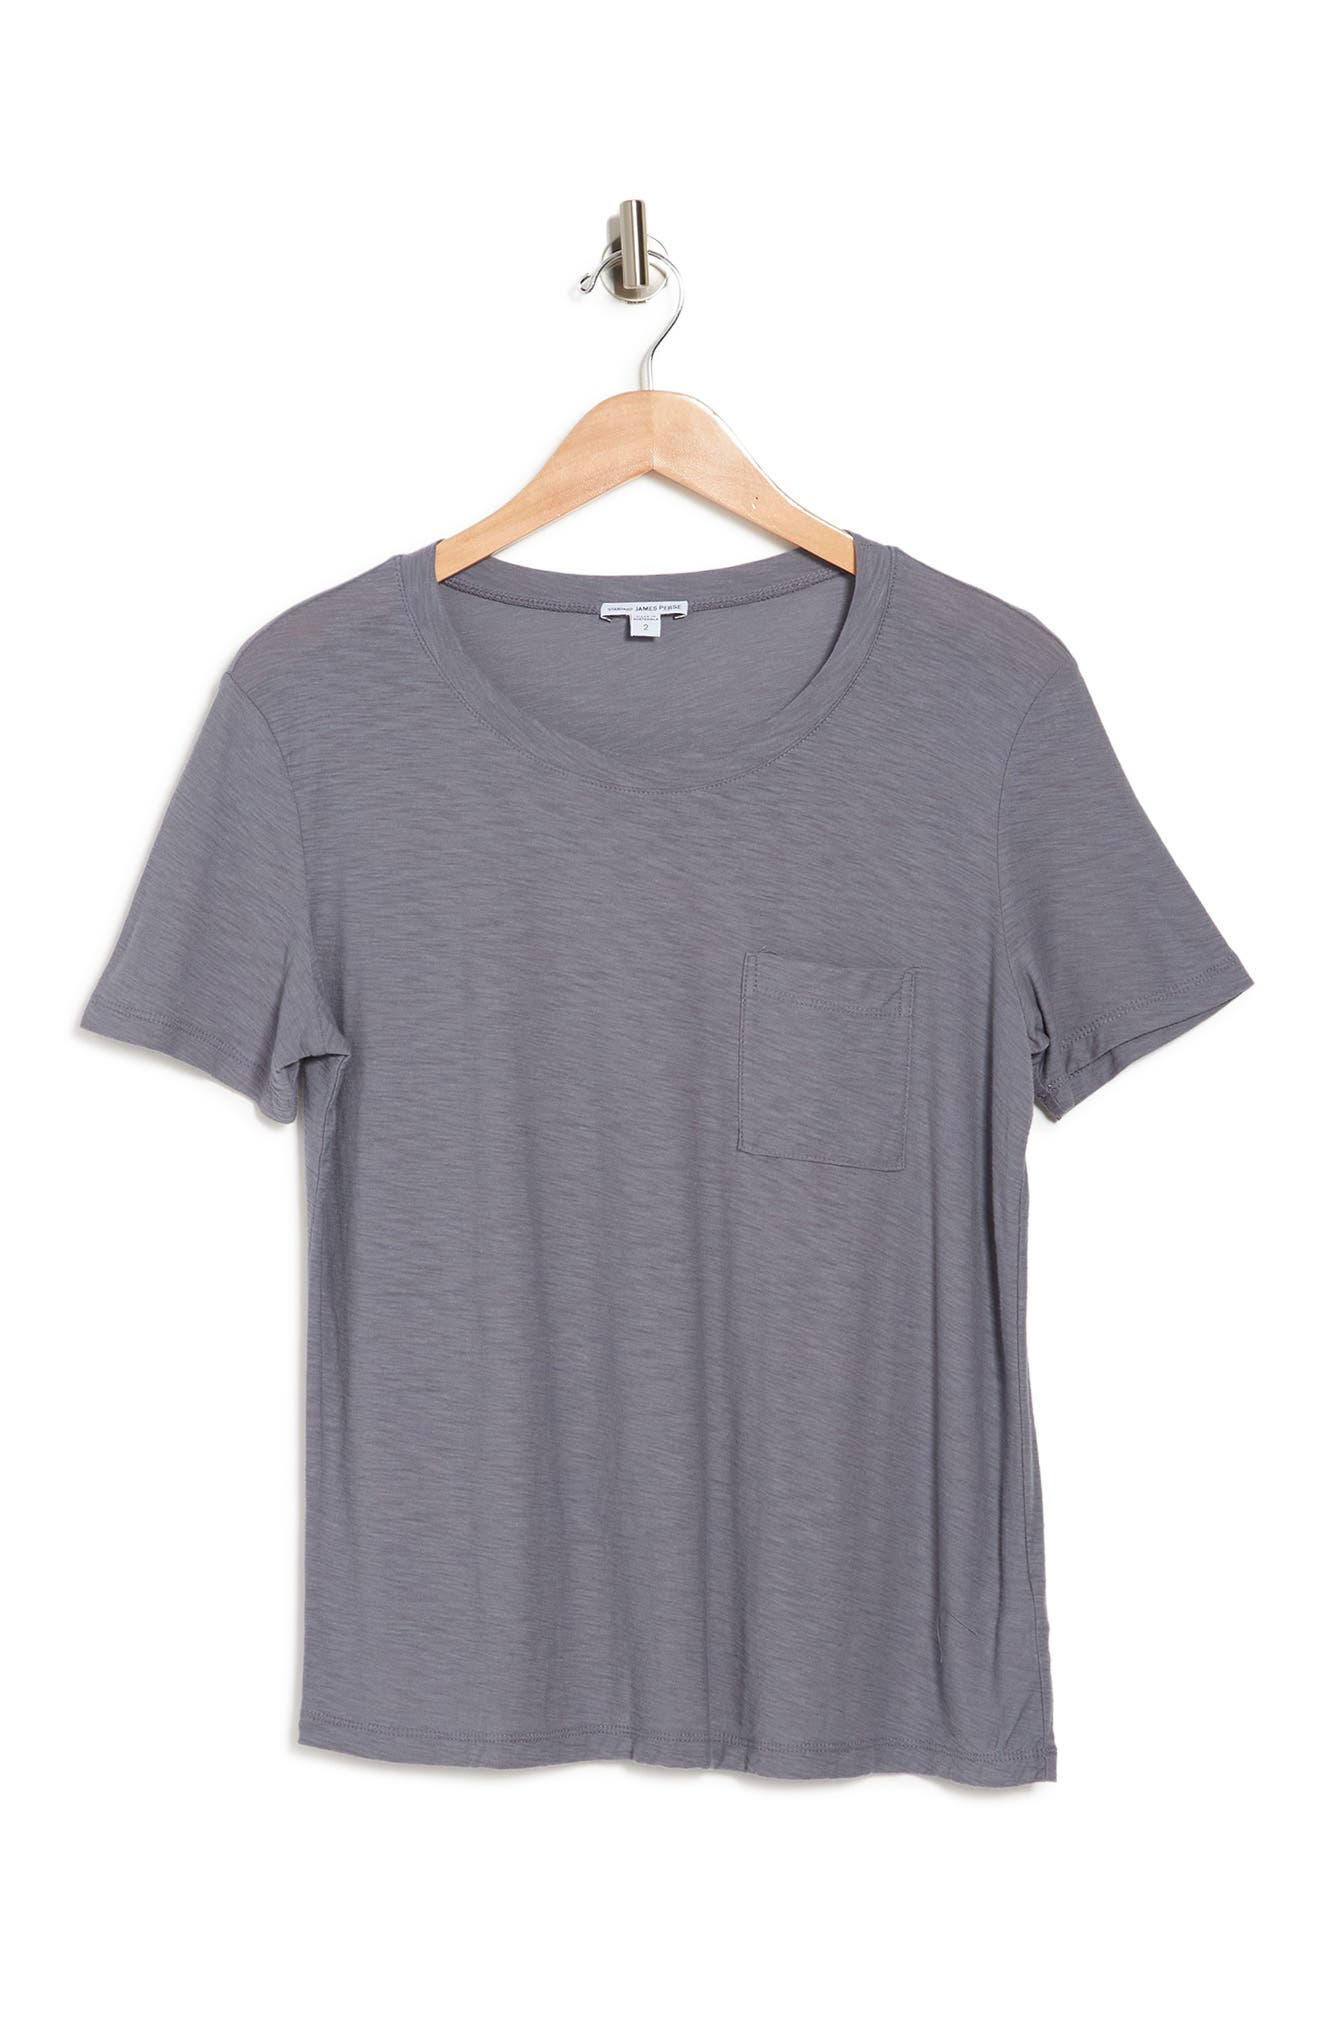 James Perse Crew Neck Pocket T-shirt In North